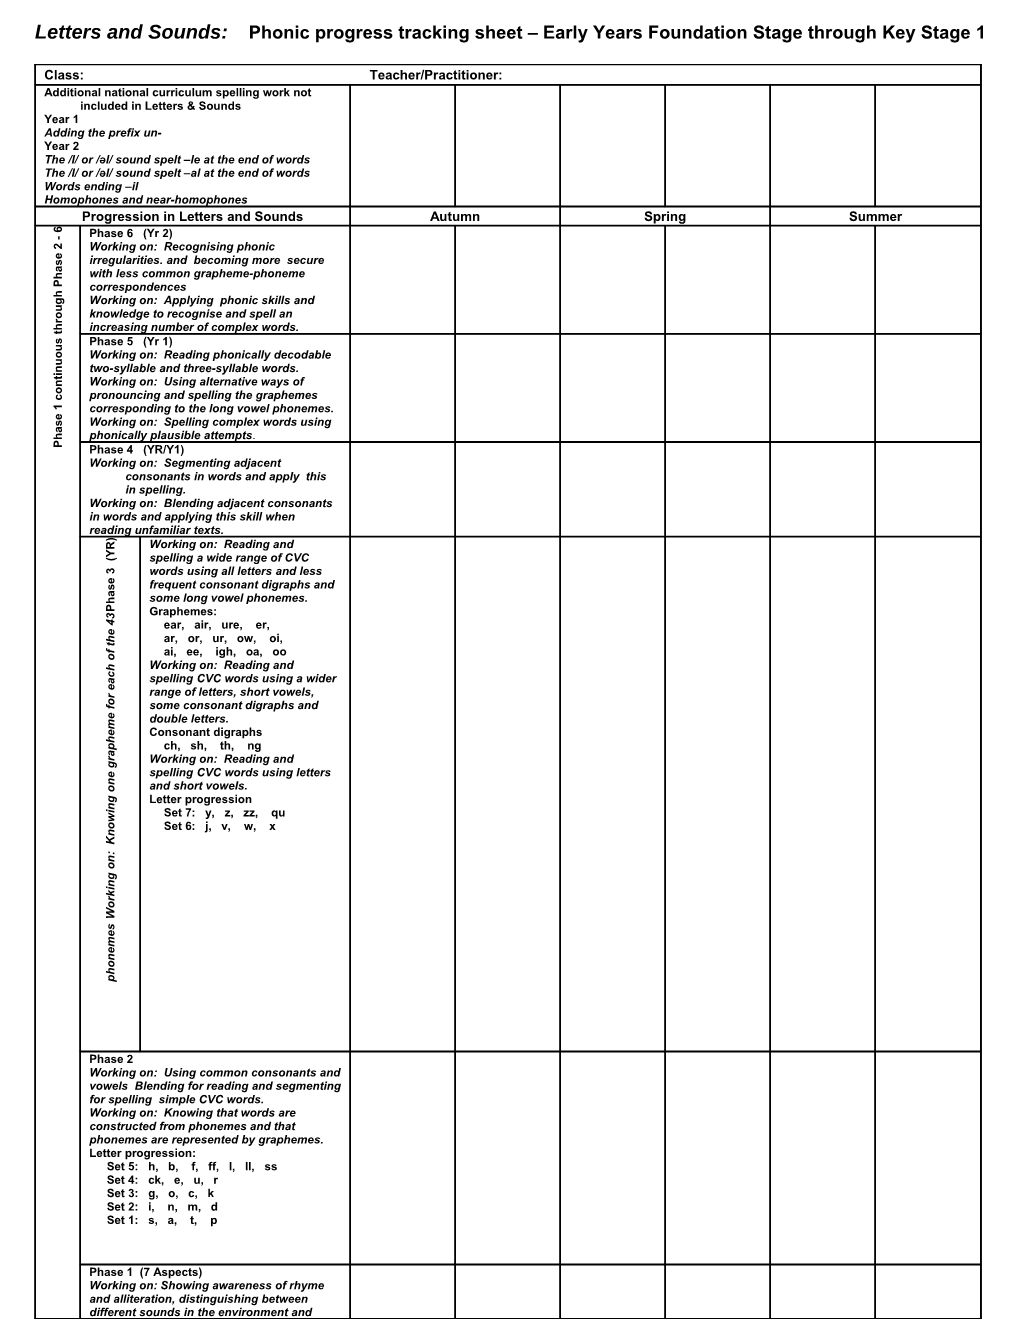 Phonics Progress Tracking Sheet Early Years Foundation Stage Through Key Stage 1 s1